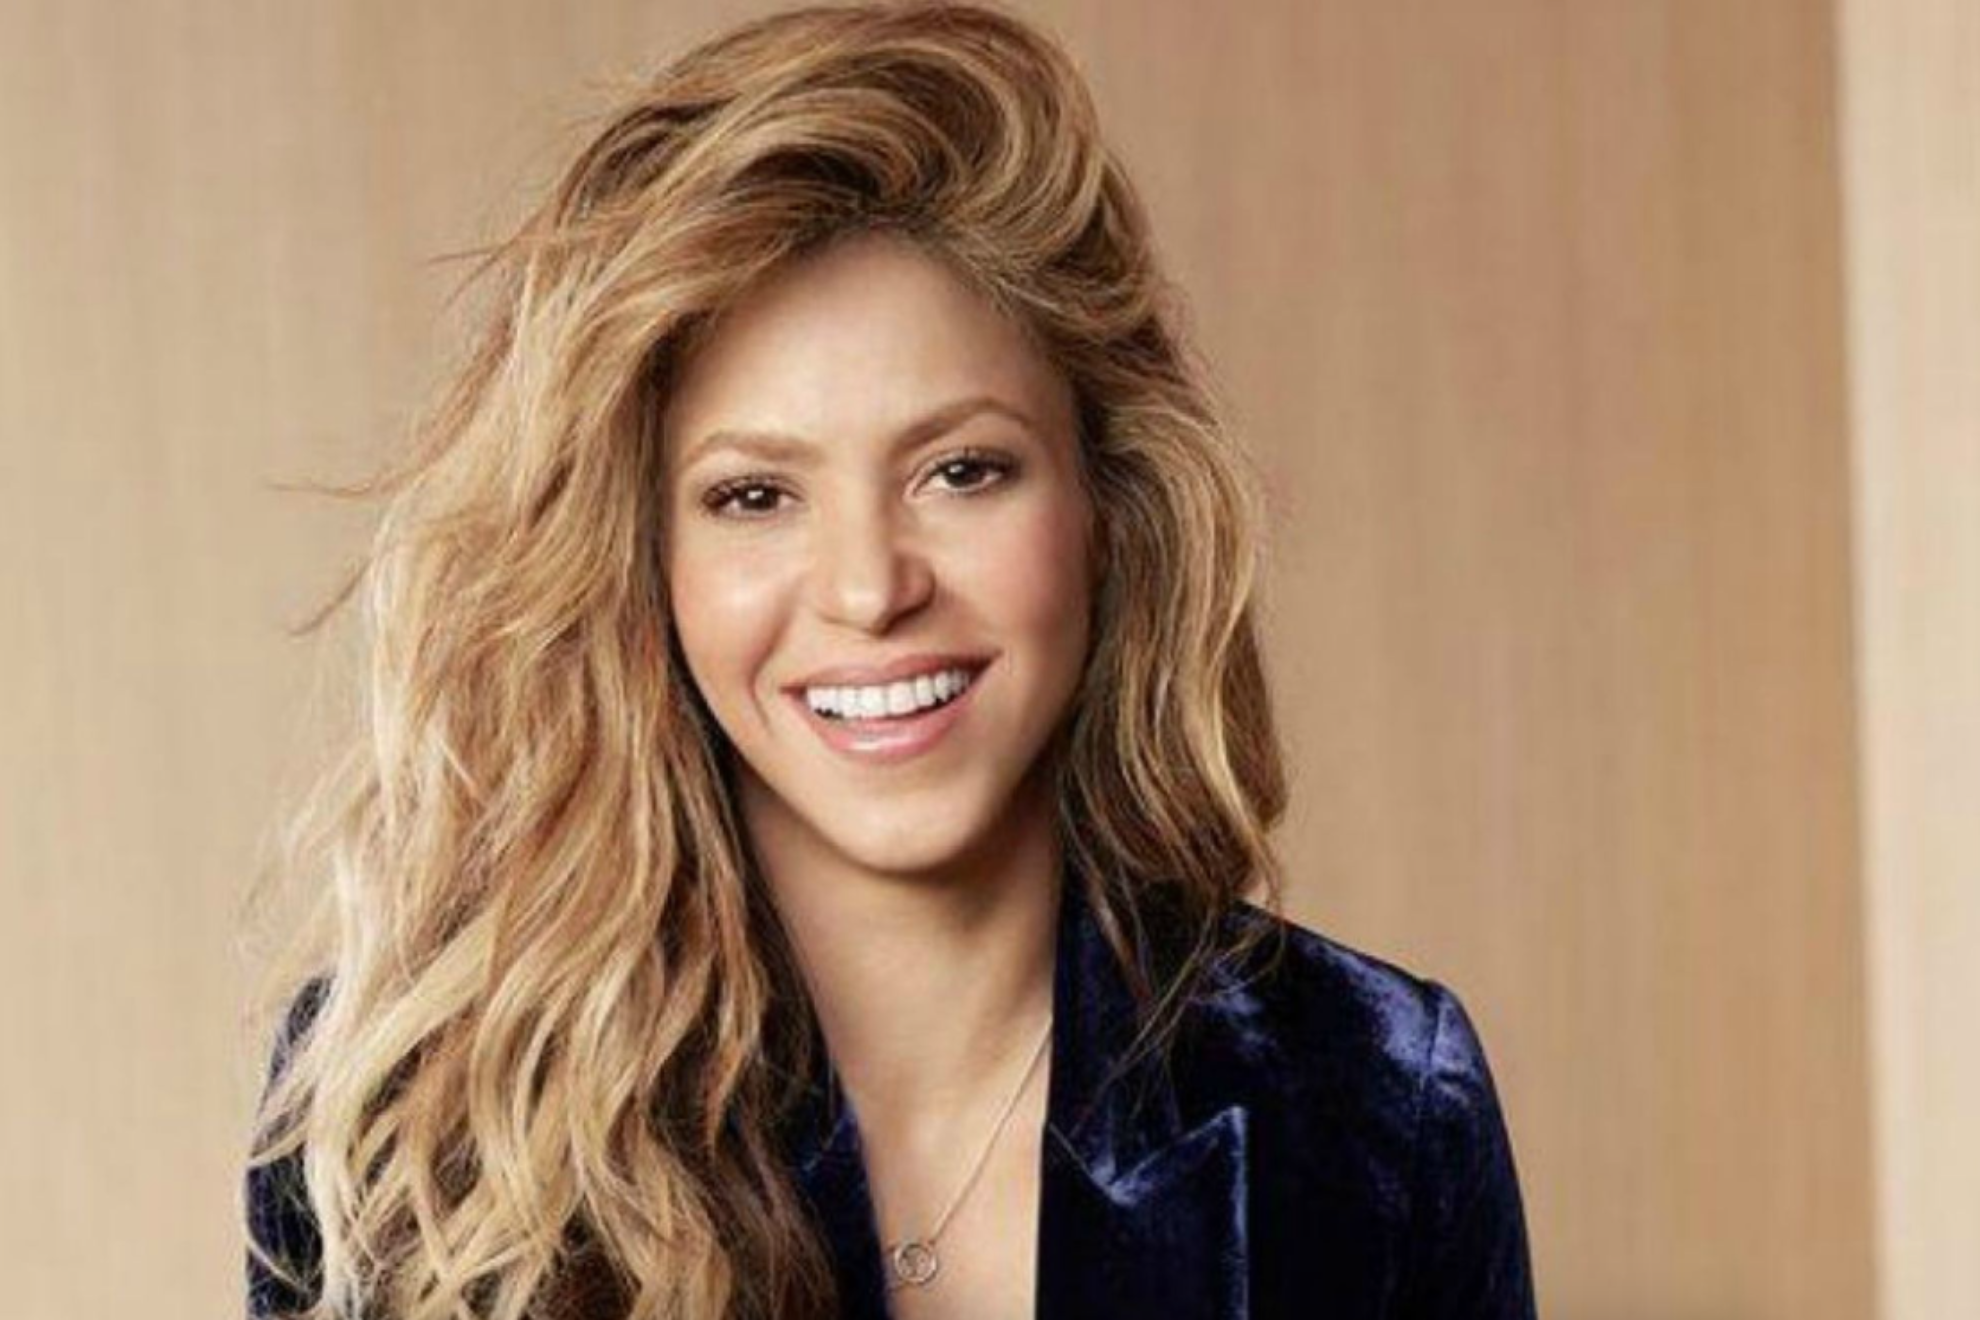 Shakira on relationship with Pique: I believed in 'till death do us part'